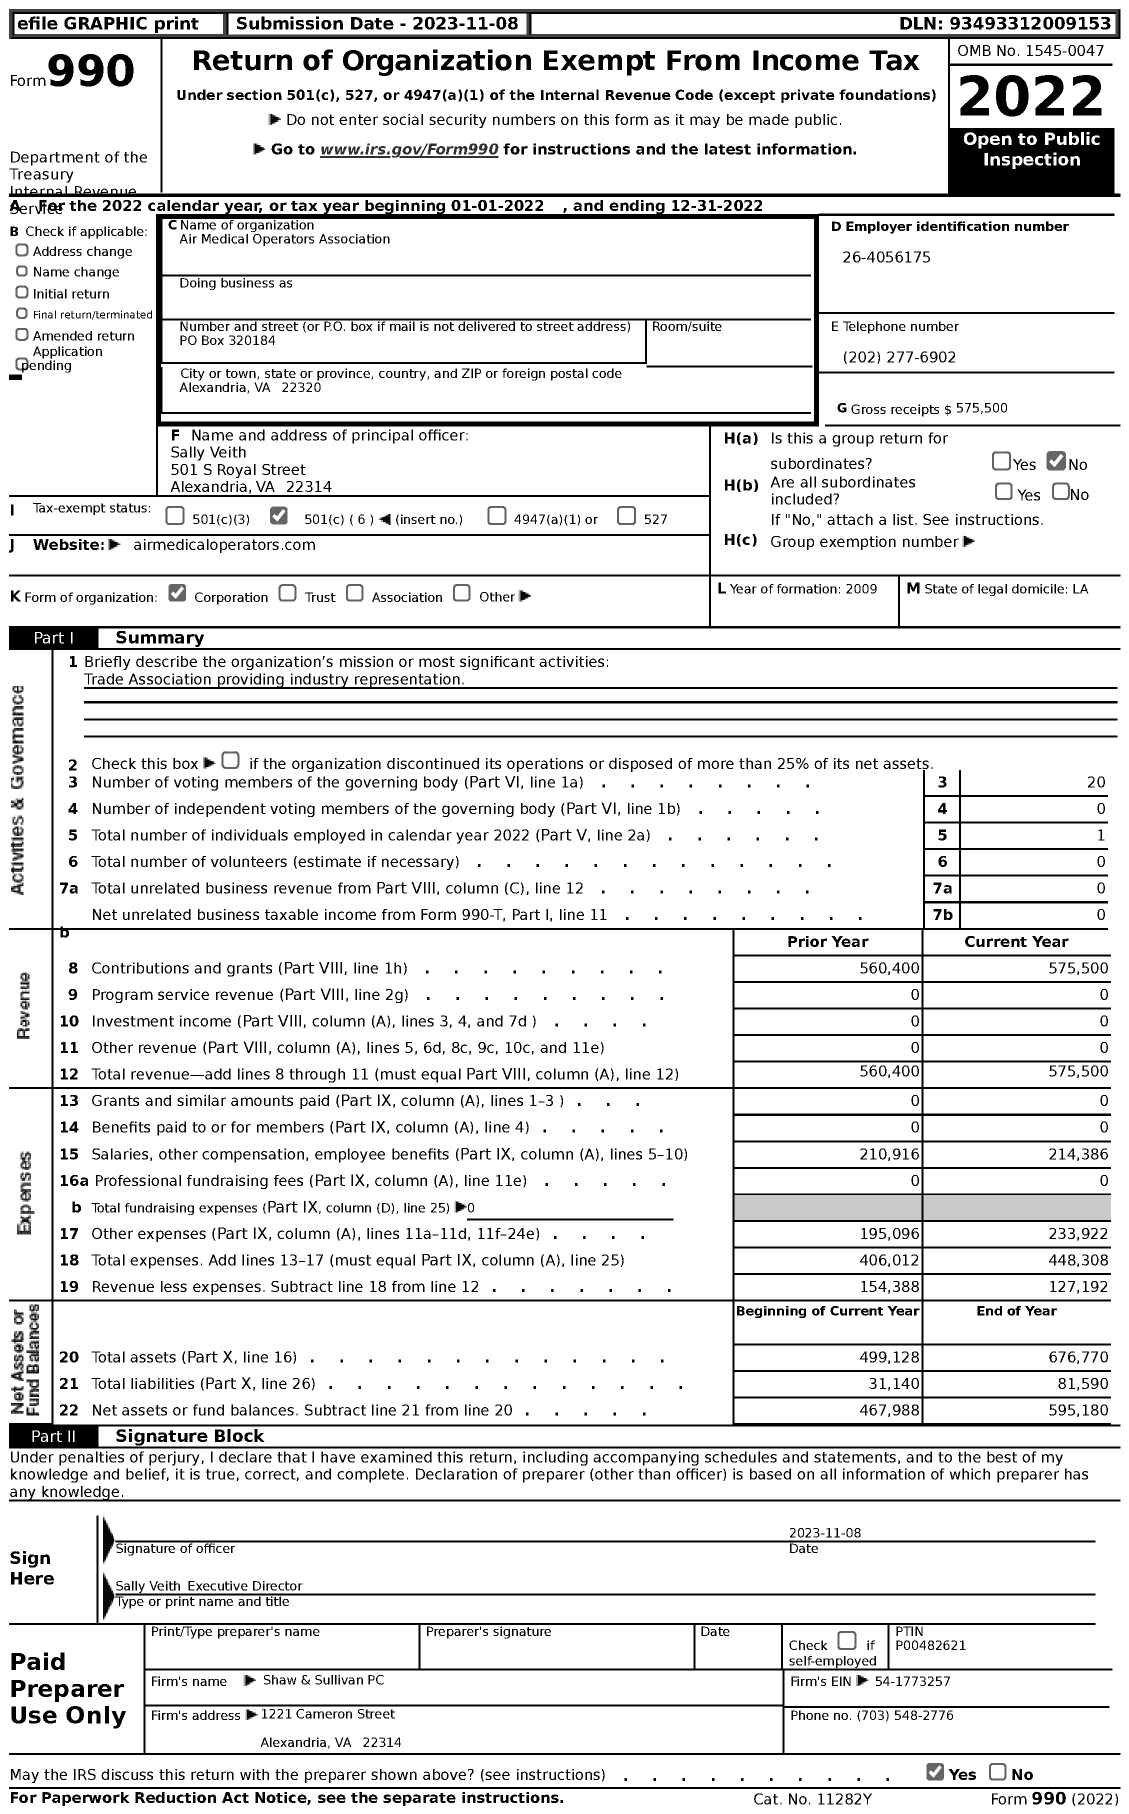 Image of first page of 2022 Form 990 for Air Medical Operators Association